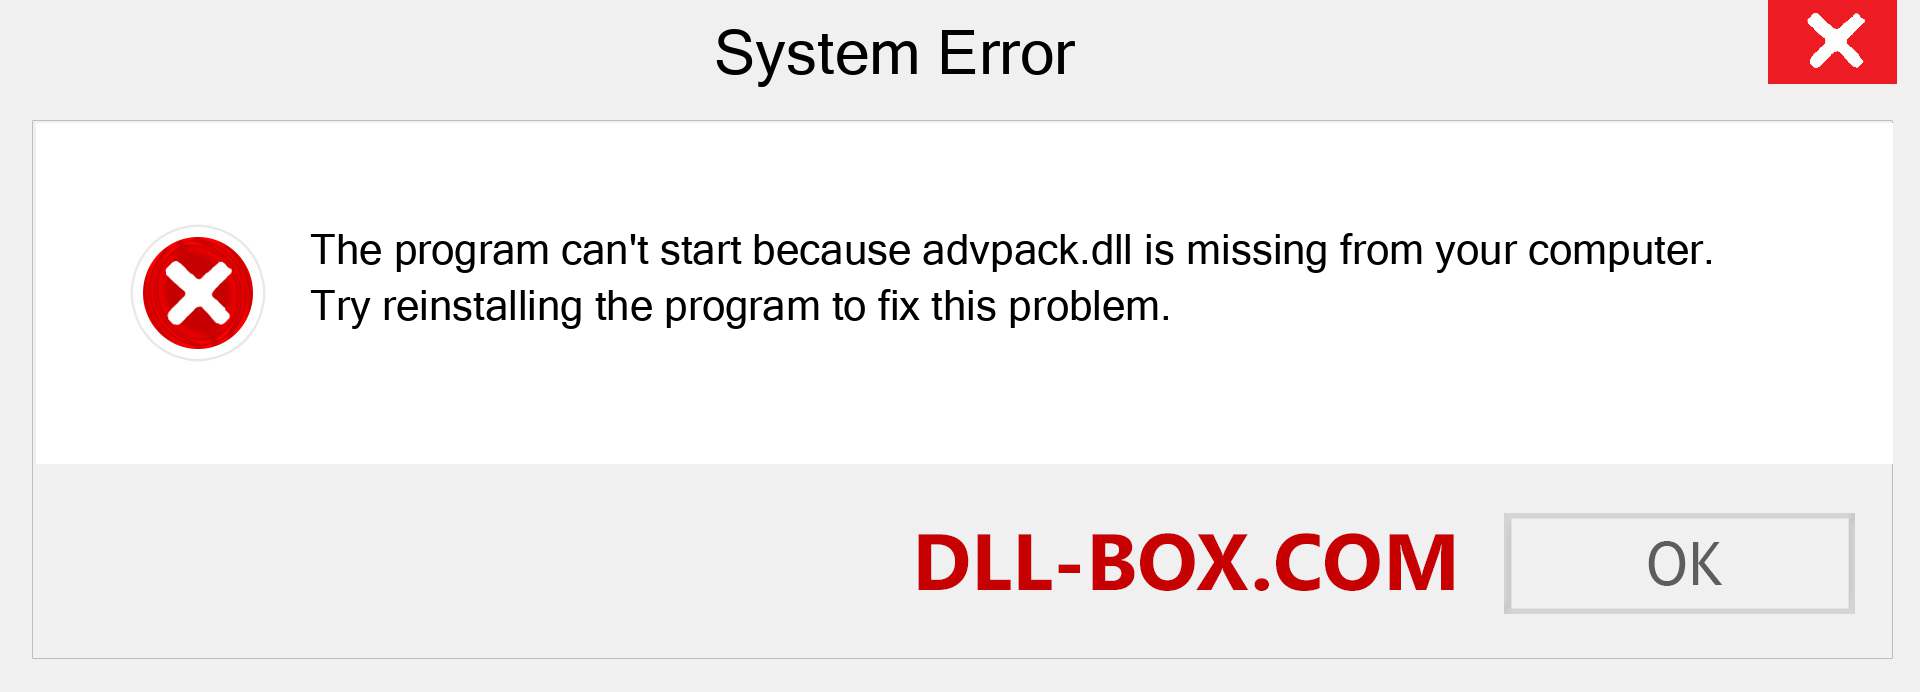  advpack.dll file is missing?. Download for Windows 7, 8, 10 - Fix  advpack dll Missing Error on Windows, photos, images